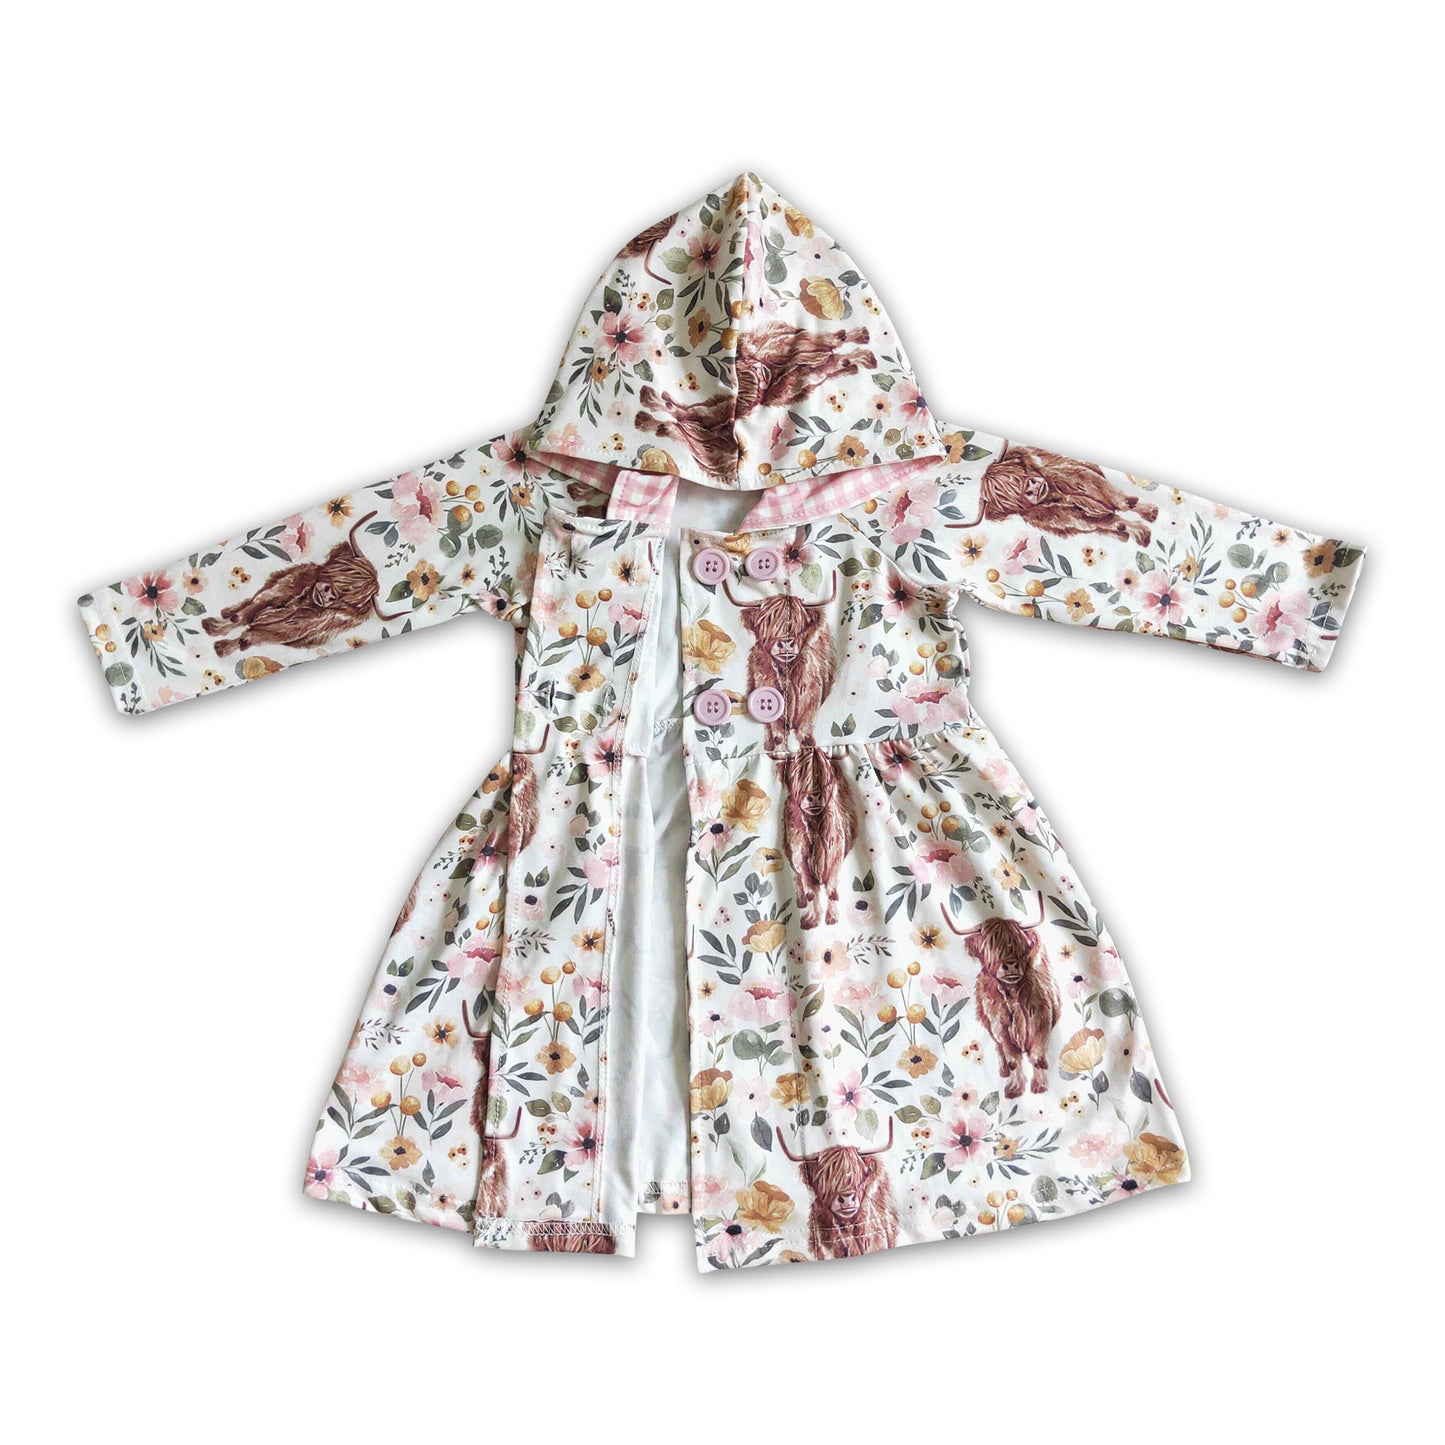 Highland cow floral girls fall hoodie dress